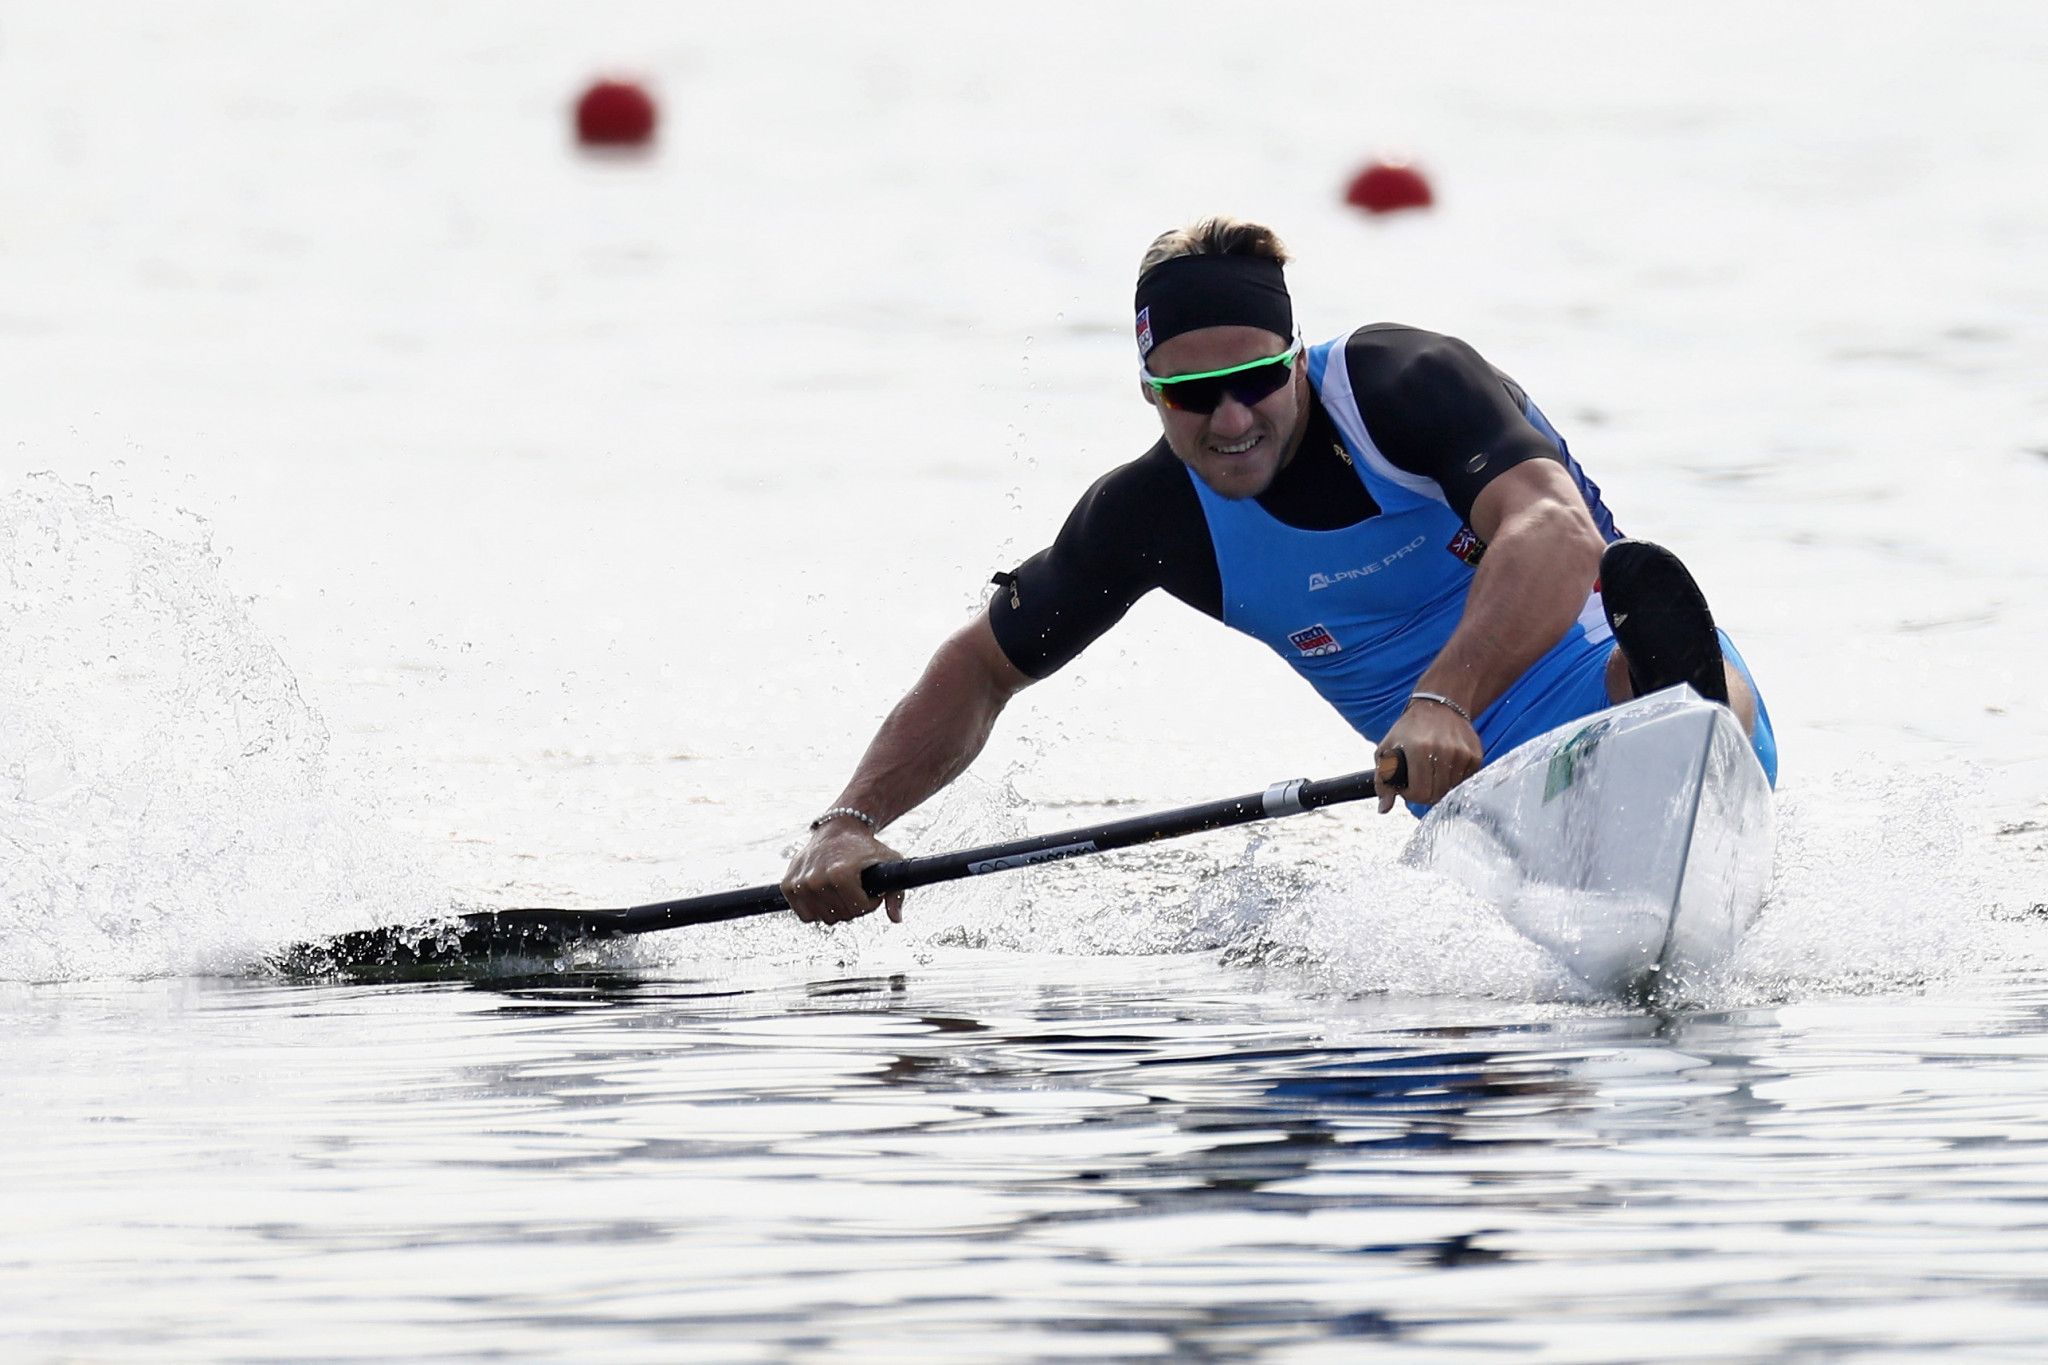 Martin Fuksa won a high quality C1 1,000m dual today at the ICF Canoe Sprint World Cup ©Getty Images